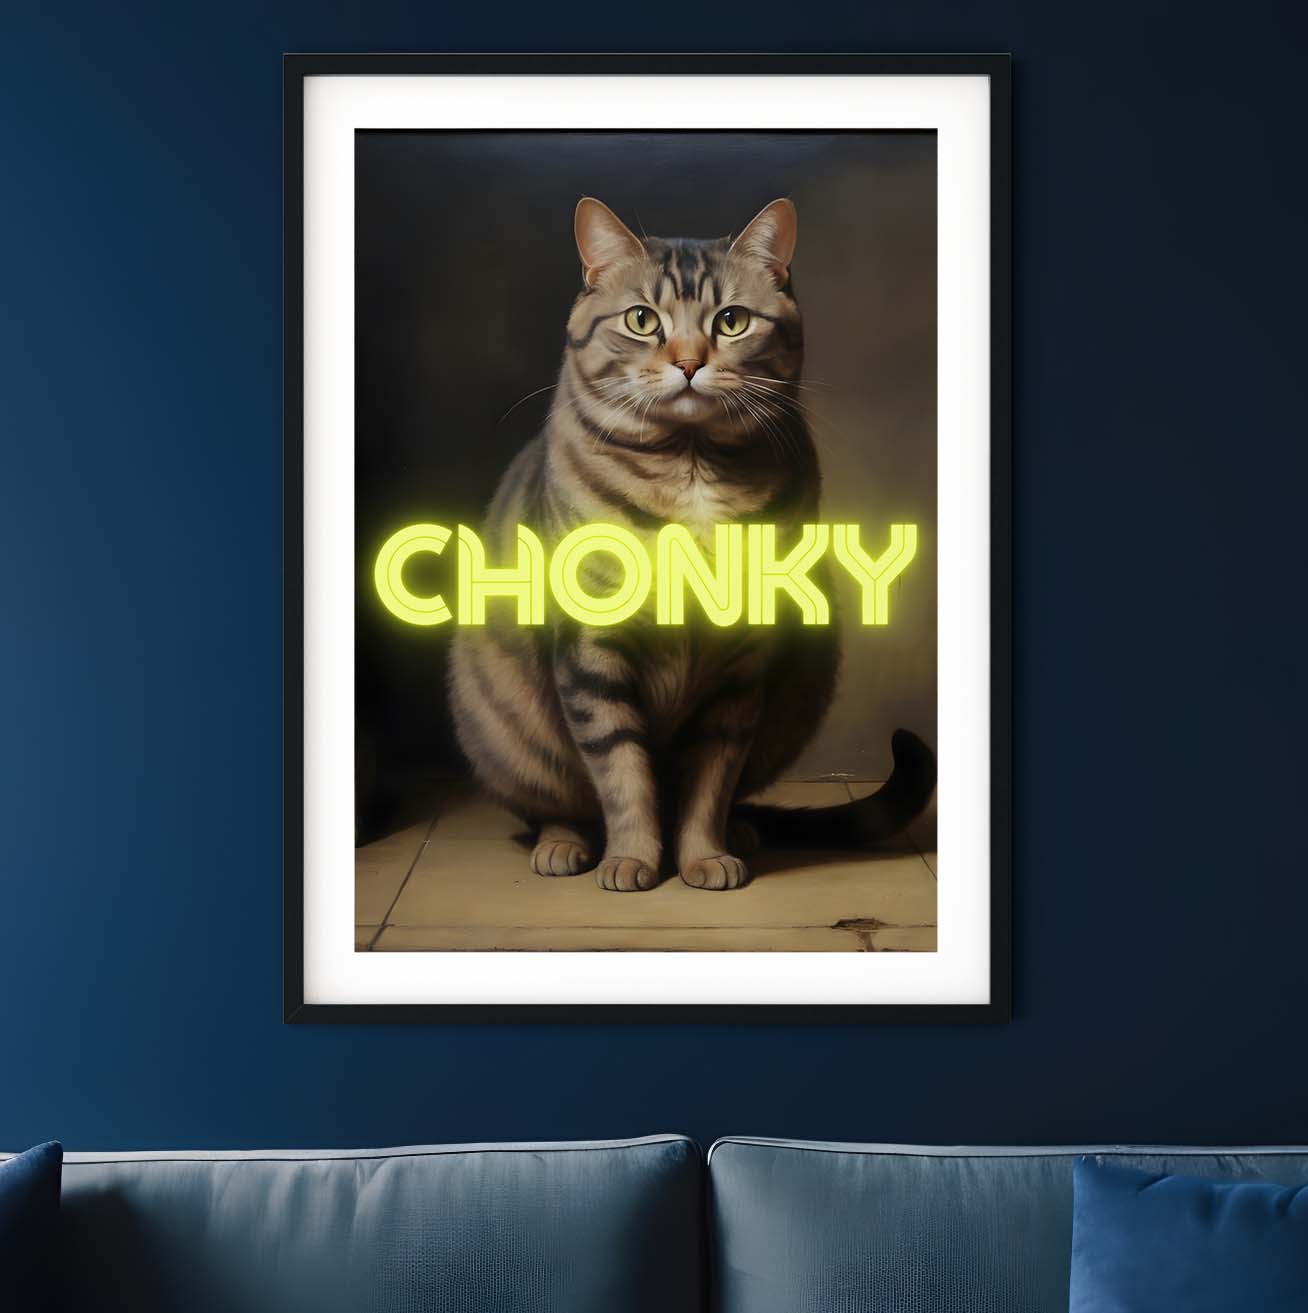 a picture of a cat with the word chonky underneath it